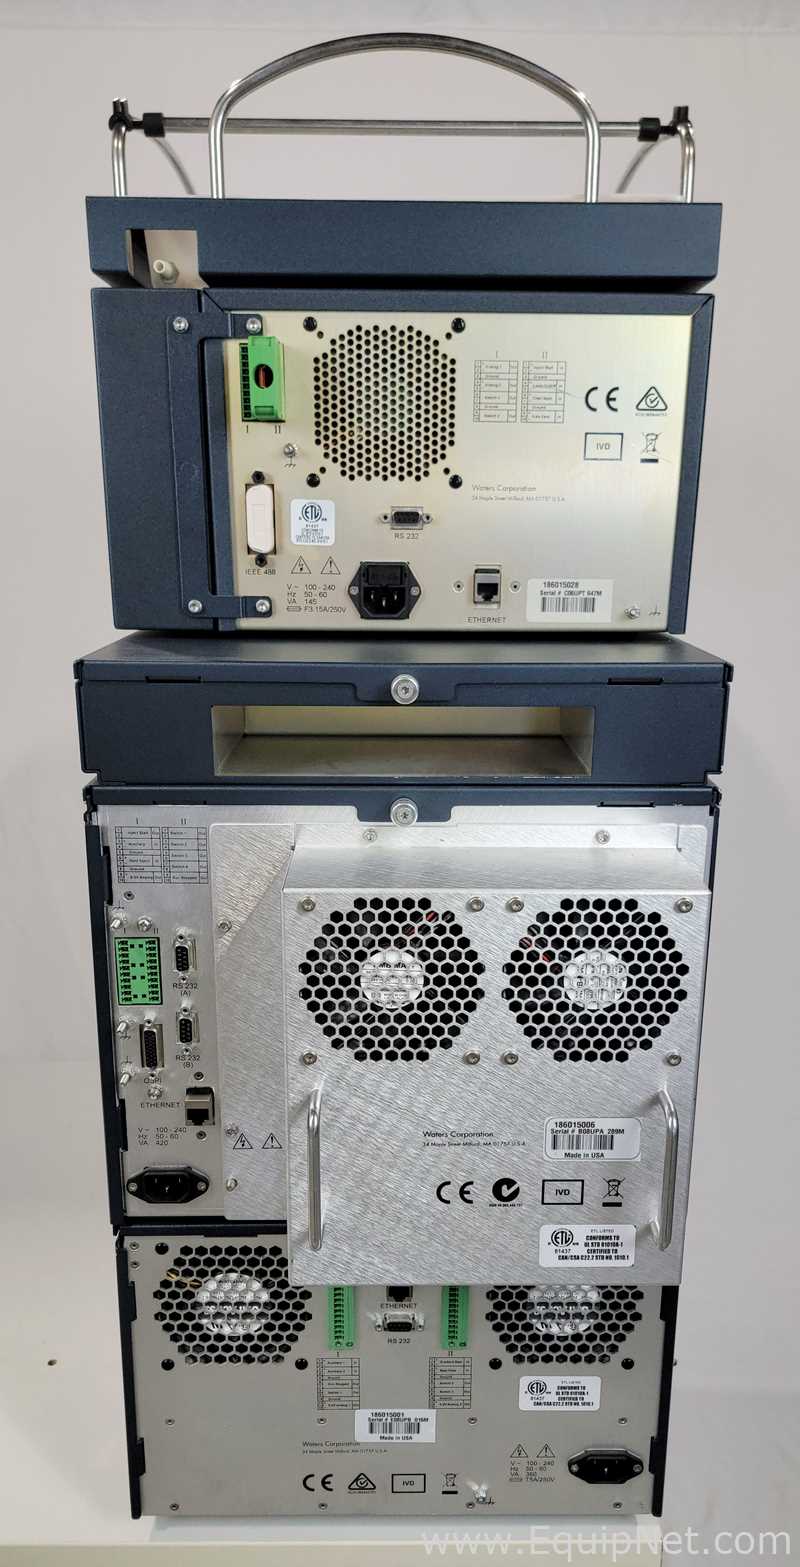 Refurbished Waters Acquity UPLC with UV Detector. Complete PM. Service reports attached